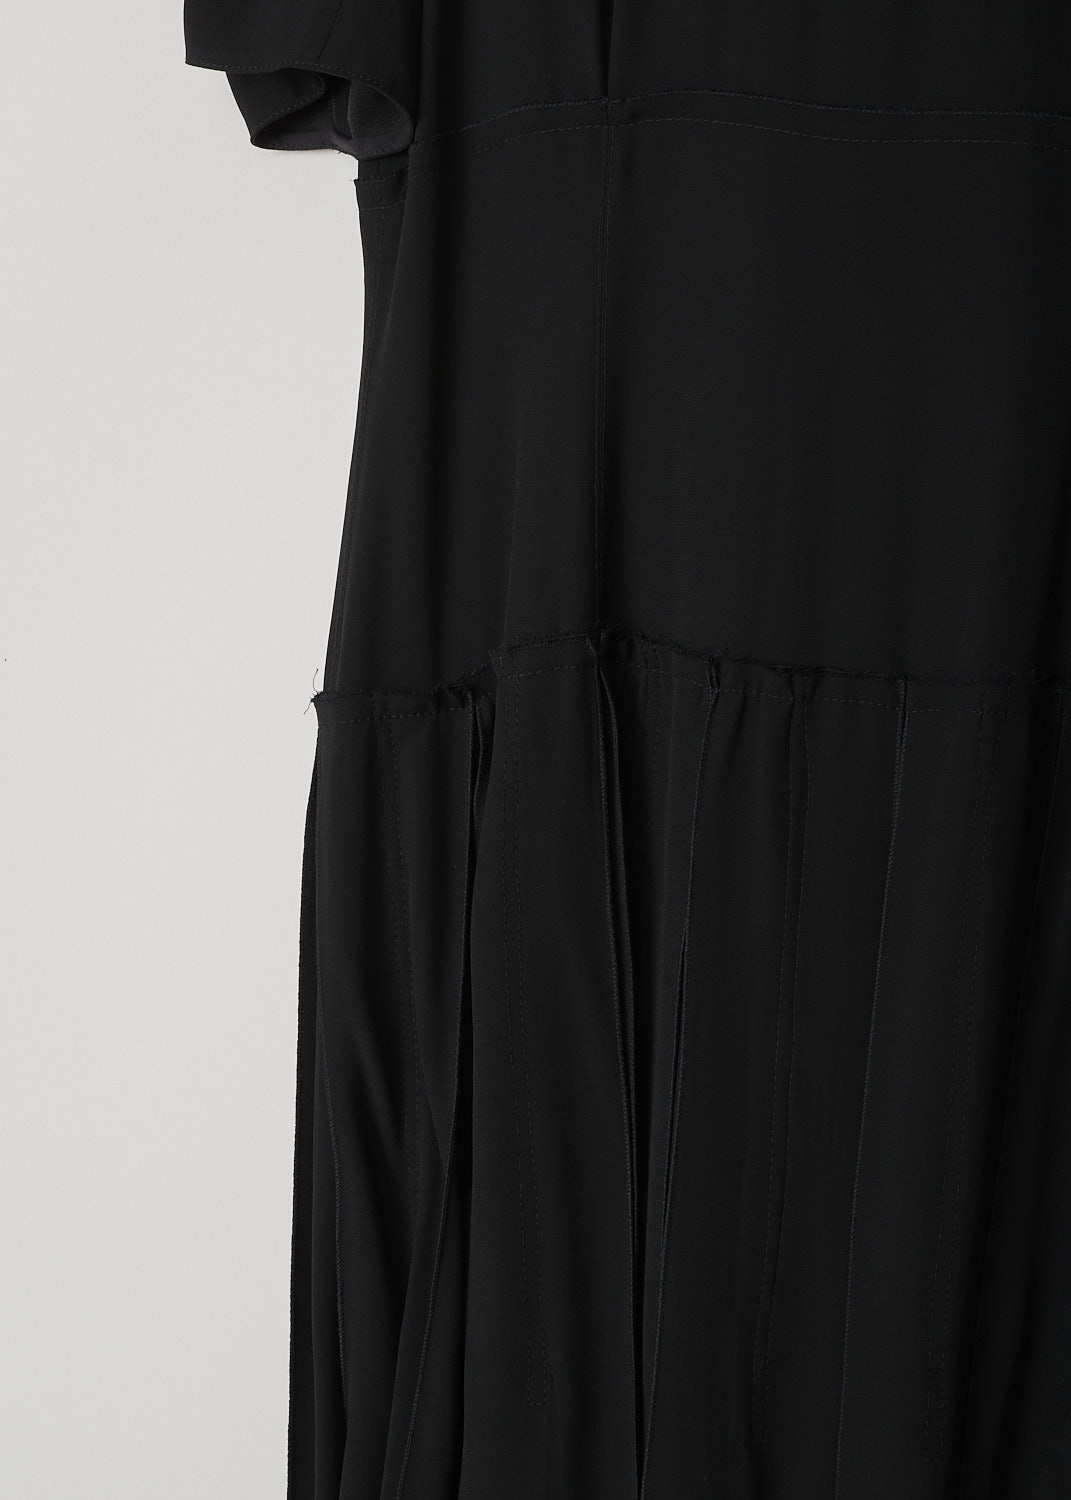 MARNI, BLACK DECONSTRUCTED DRESS, ABMA0096FY_TV285_00N99, Black, Detail, This black deconstructed dress has a round neckline and short puff sleeves. The dress has a paneled bodice with exposed seams and raw edges and a box pleated skirt. A concealed centre zip in the back functions as the closure option.   
